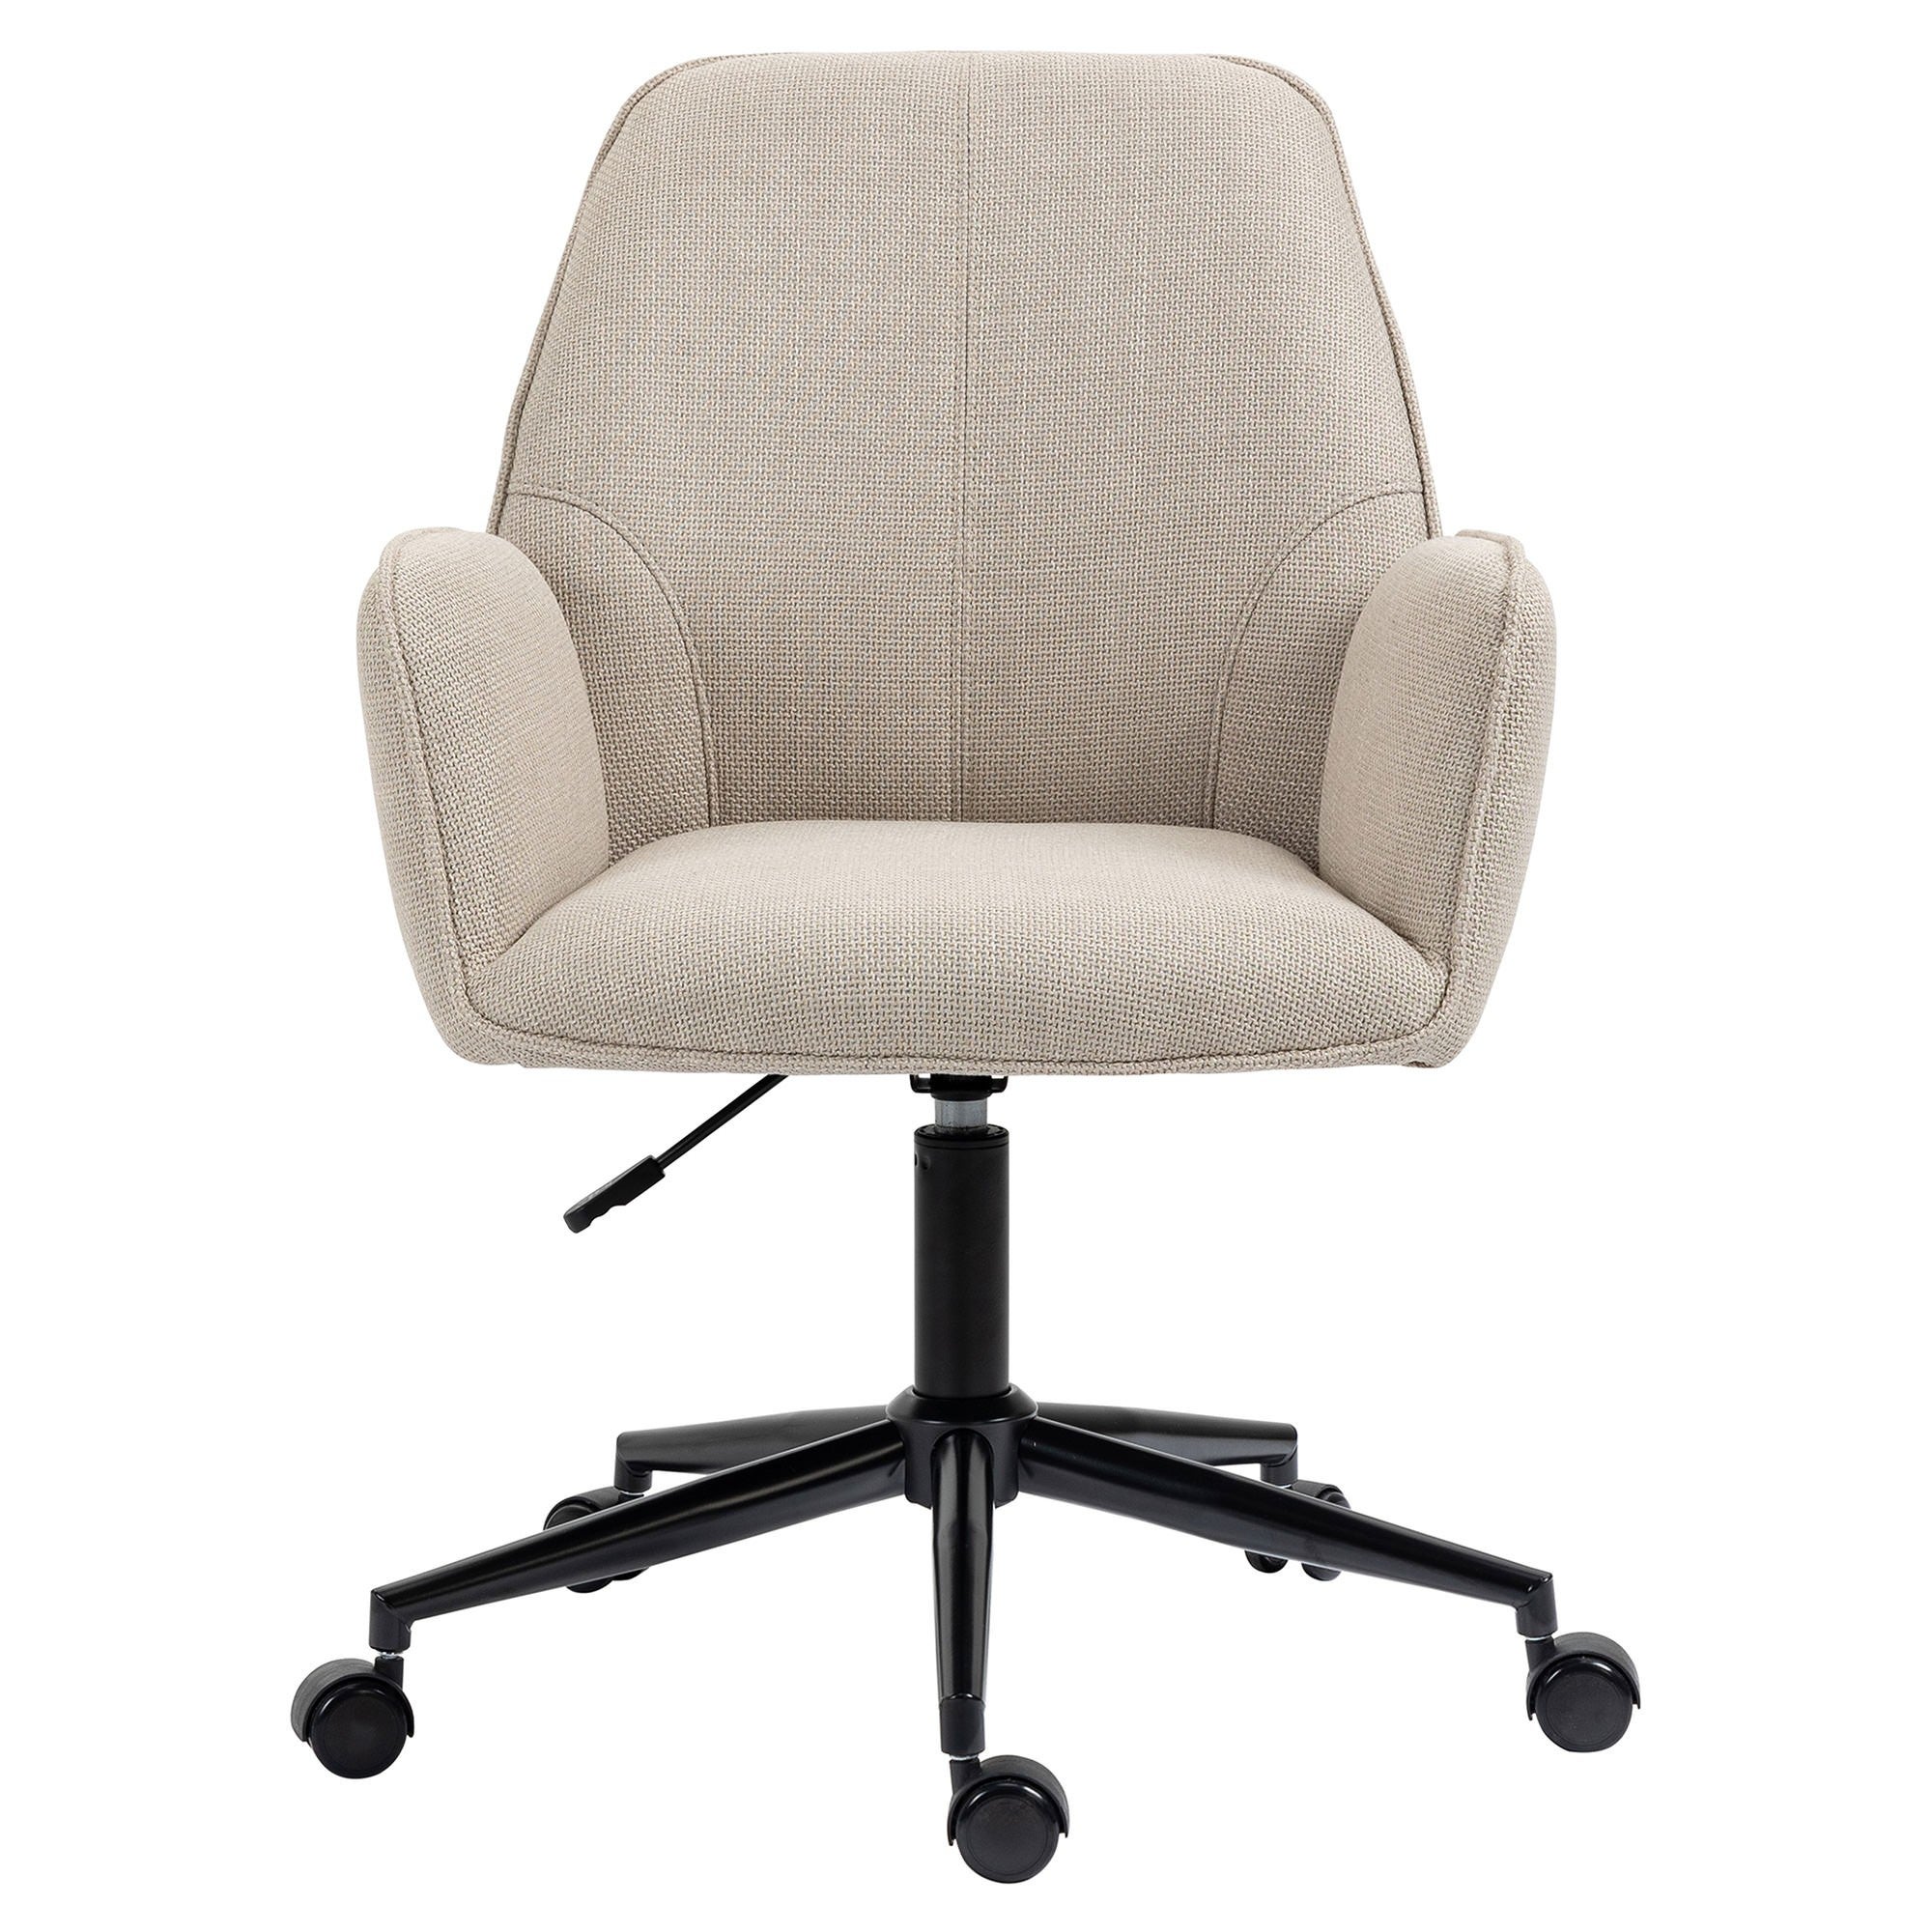 Hecate Fabric Gas Lift Office Chair, Beige